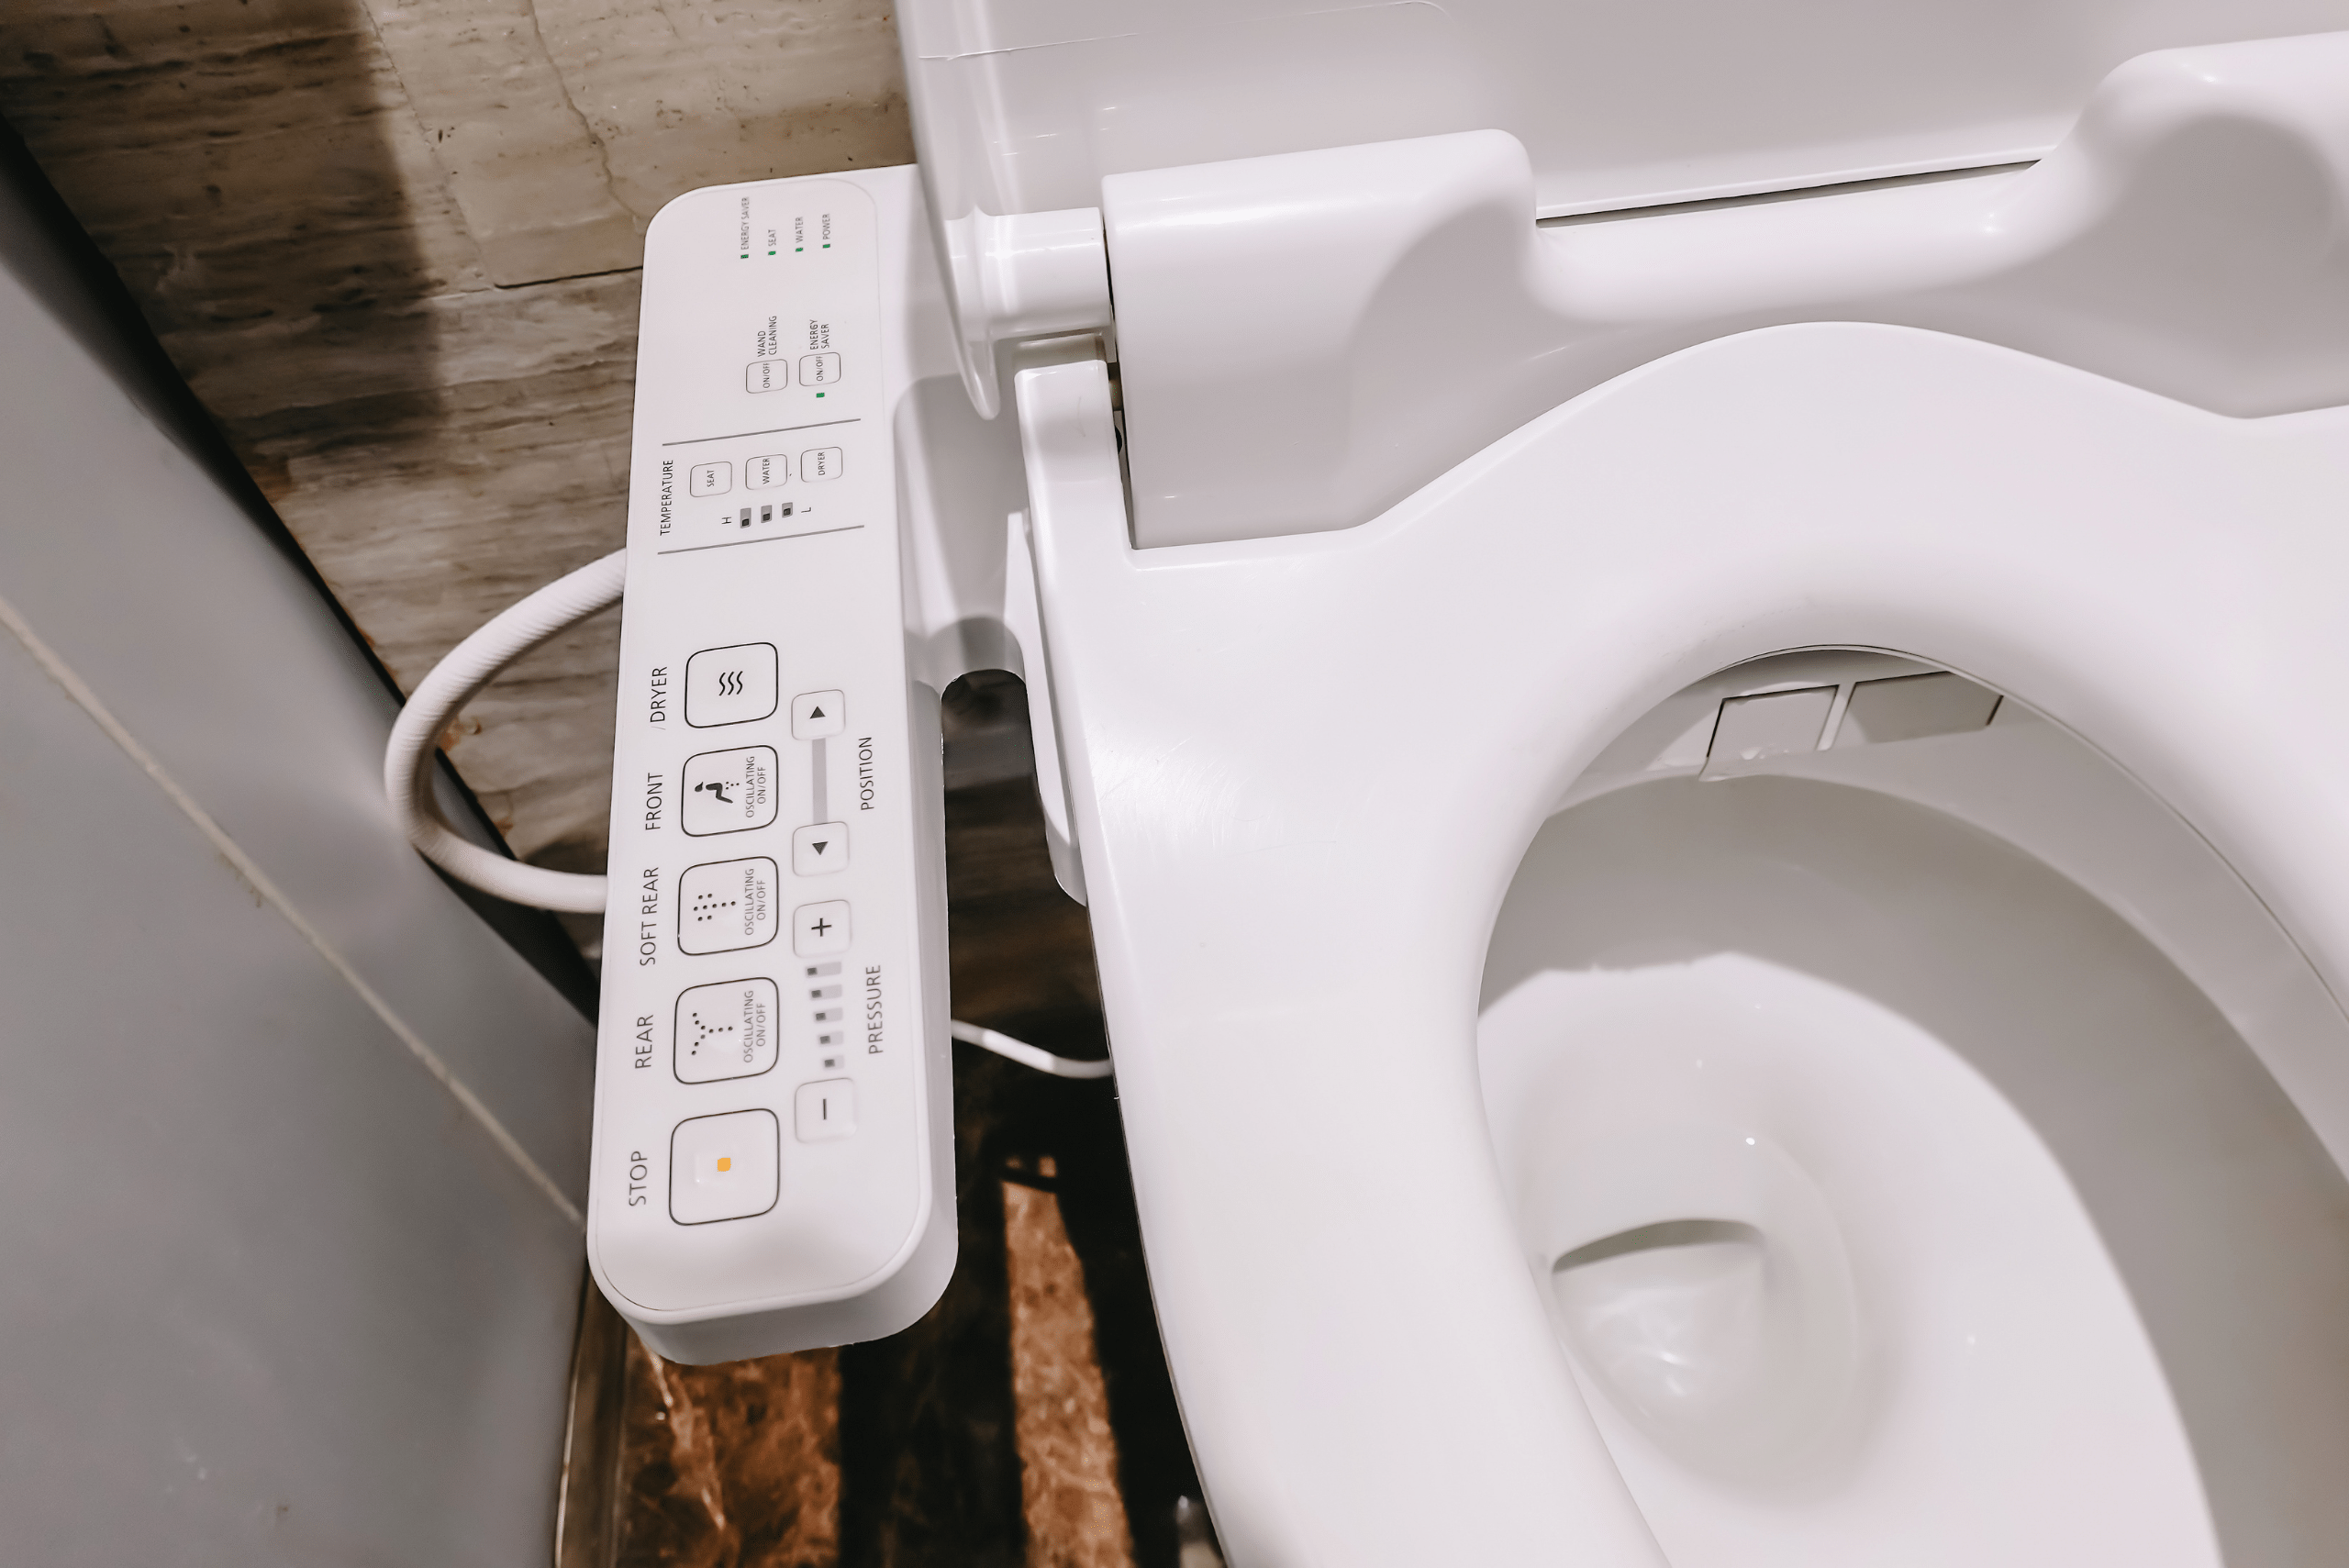 Modern bidet with controls within the toilet seat.